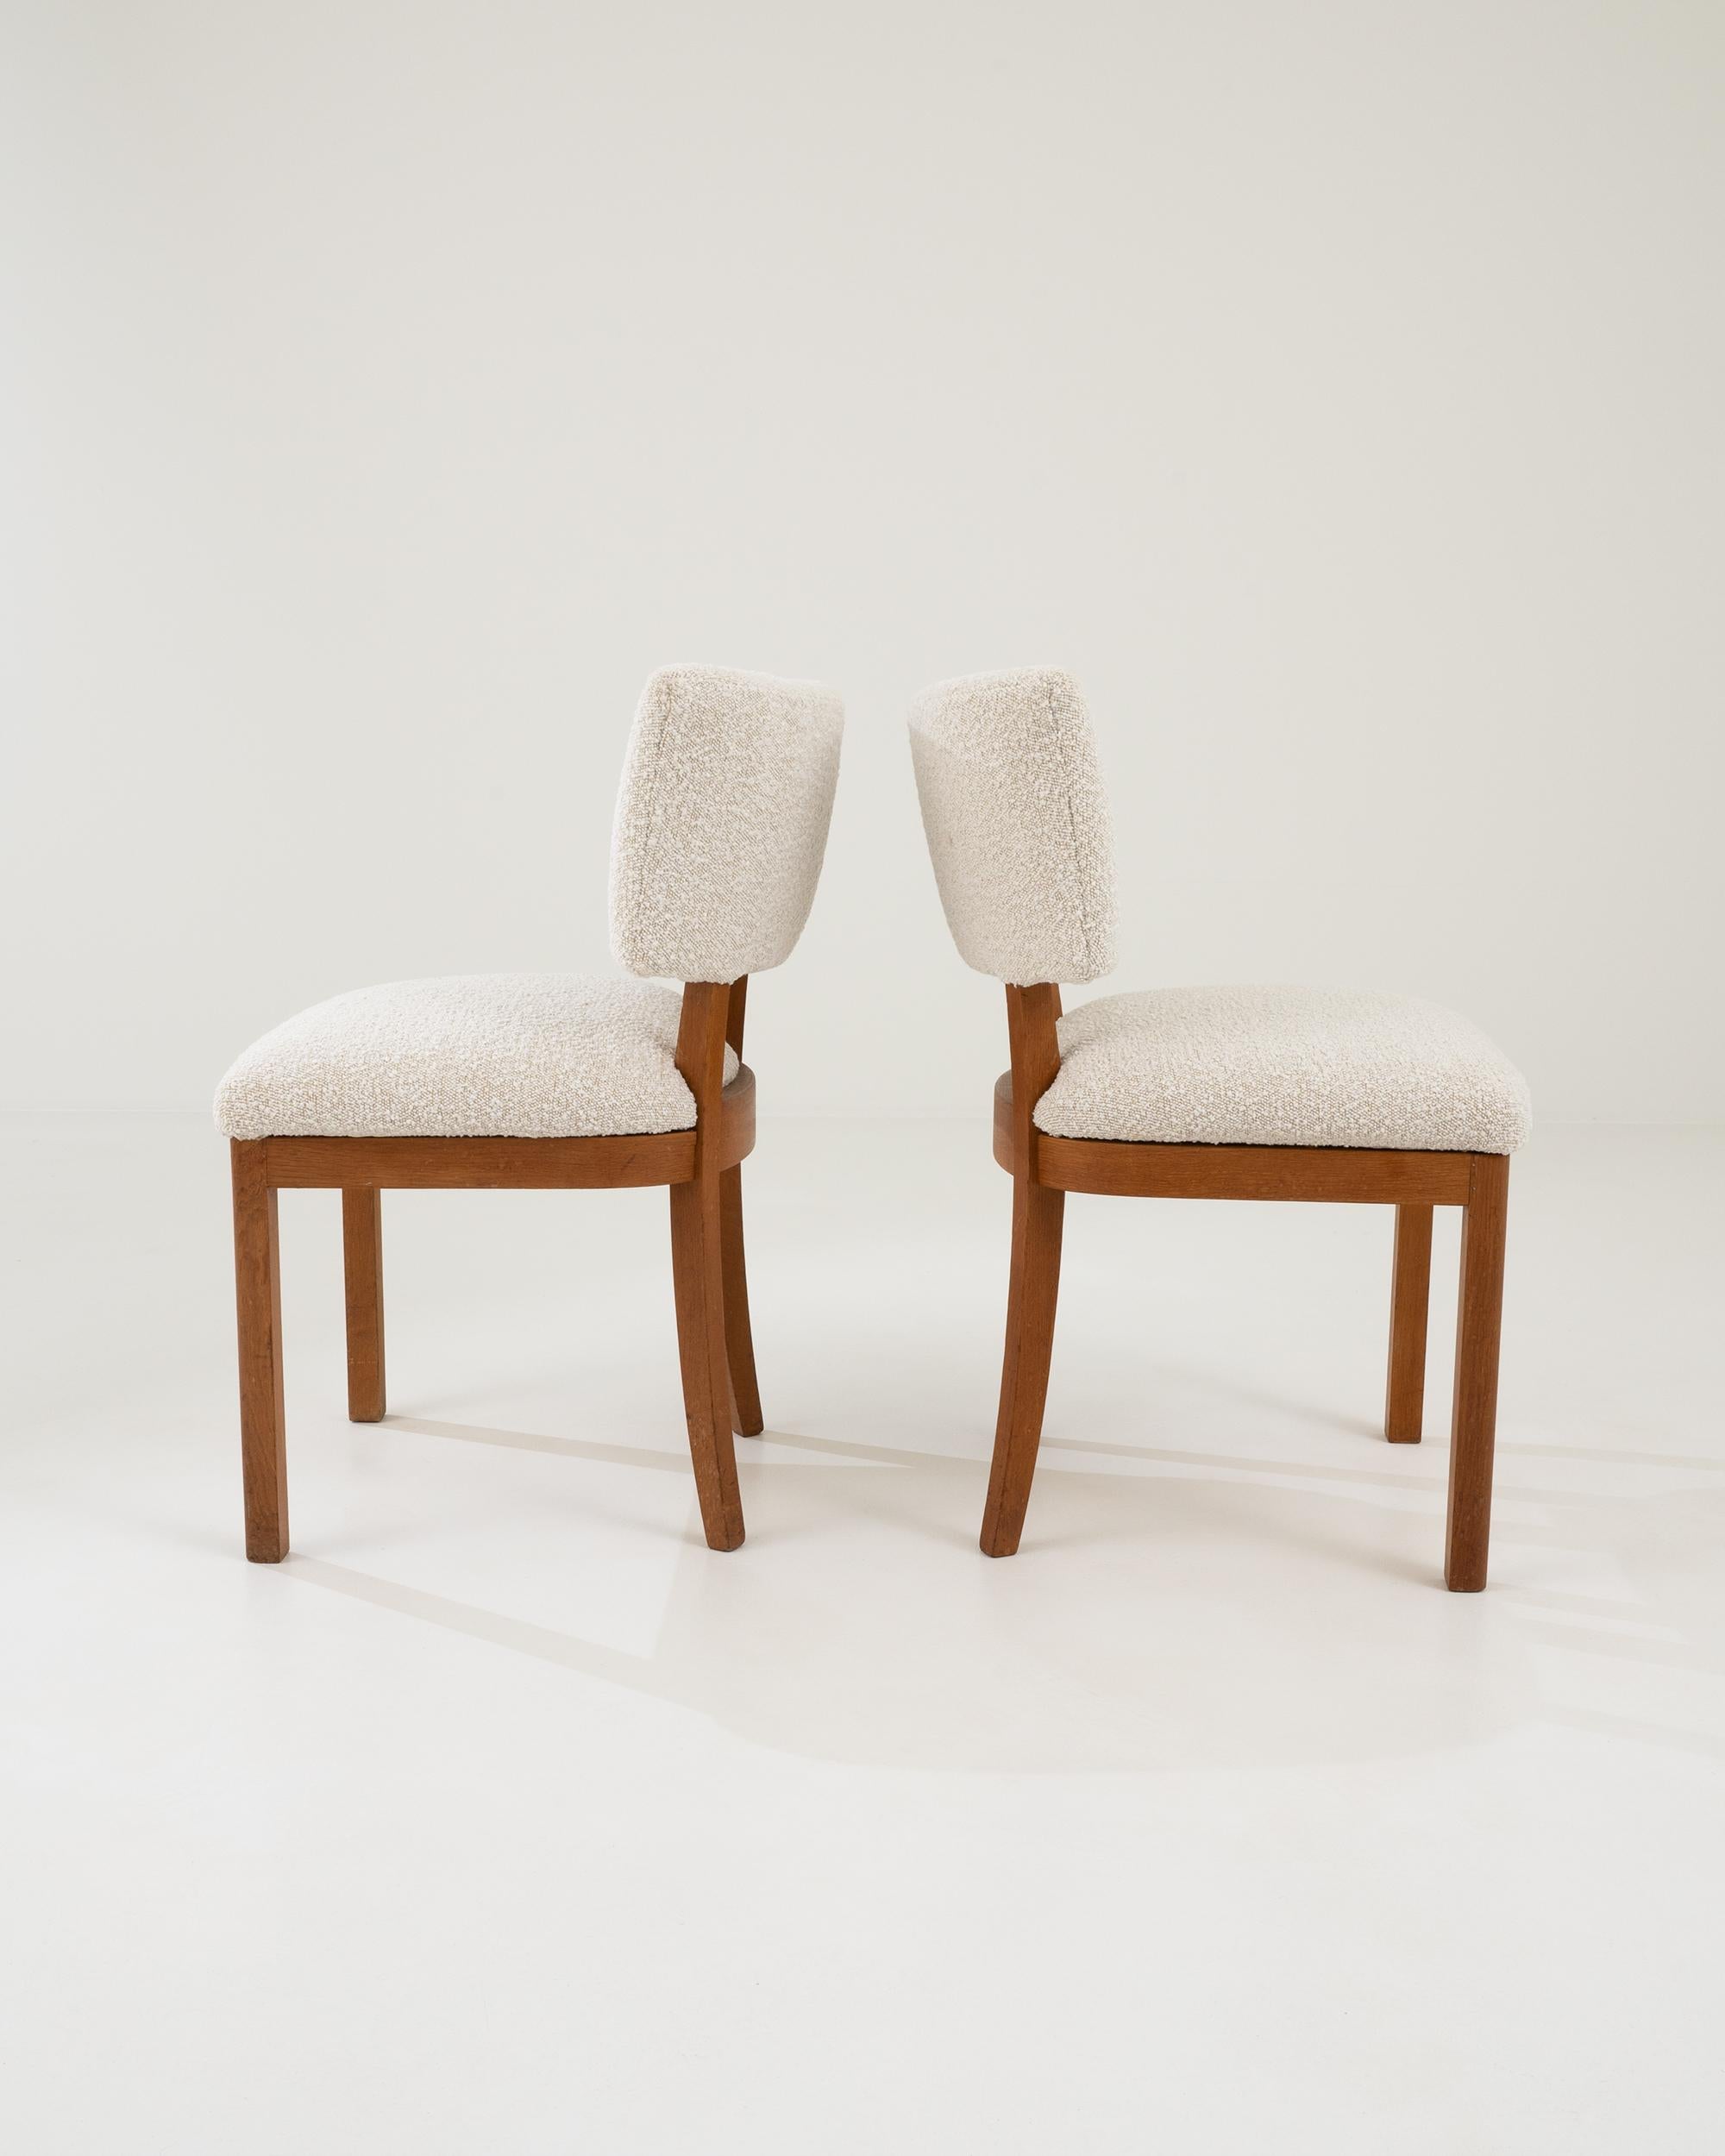 20th Century Czech Upholstered Dining Chairs, a Pair 1